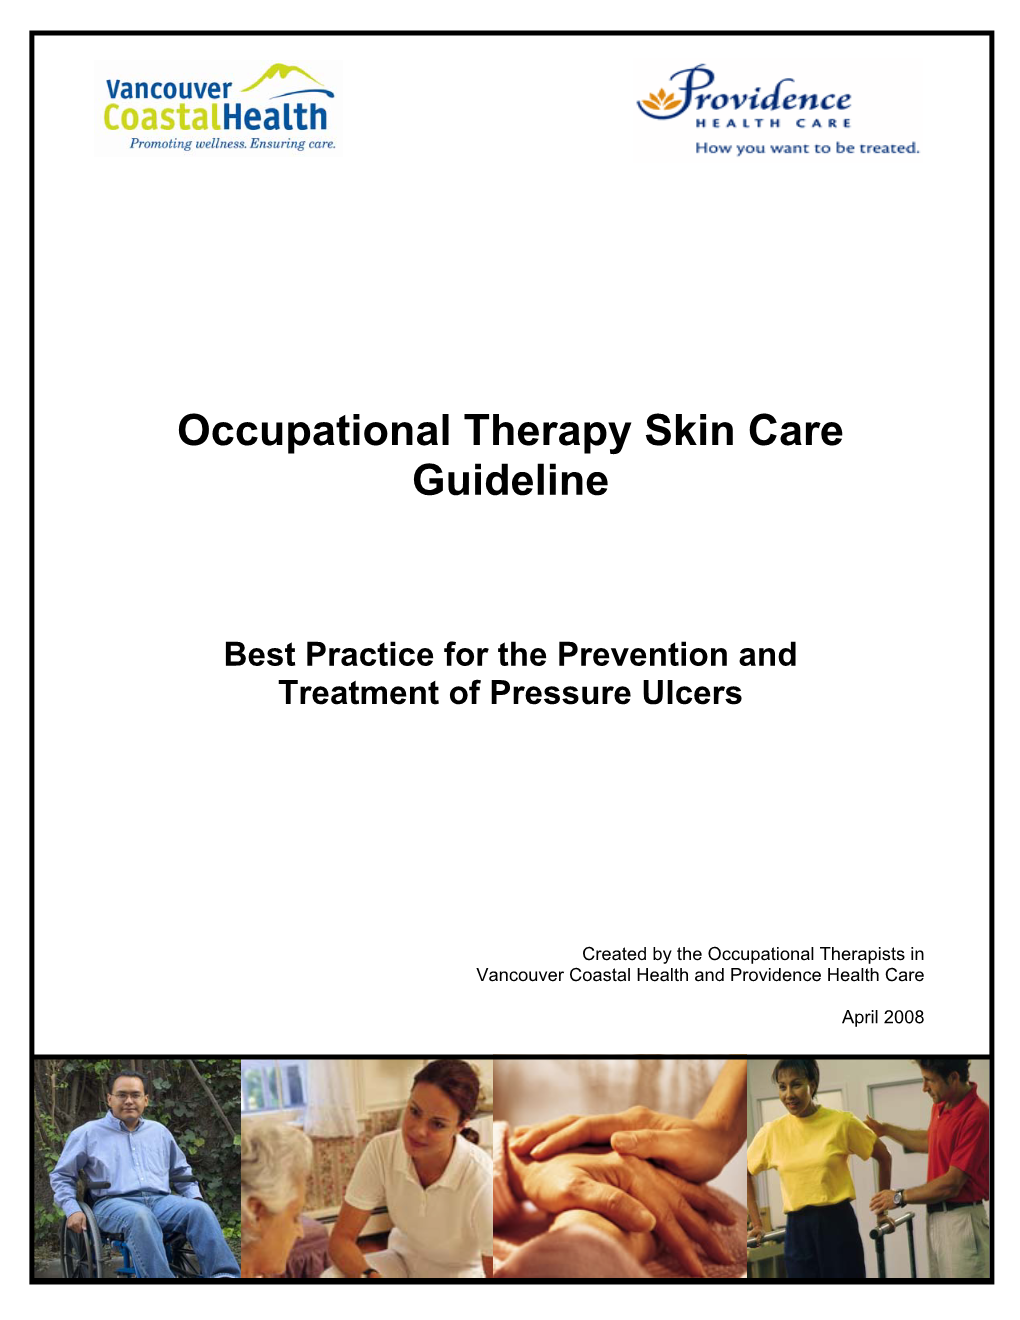 Occupational Therapy Skin Care Guideline